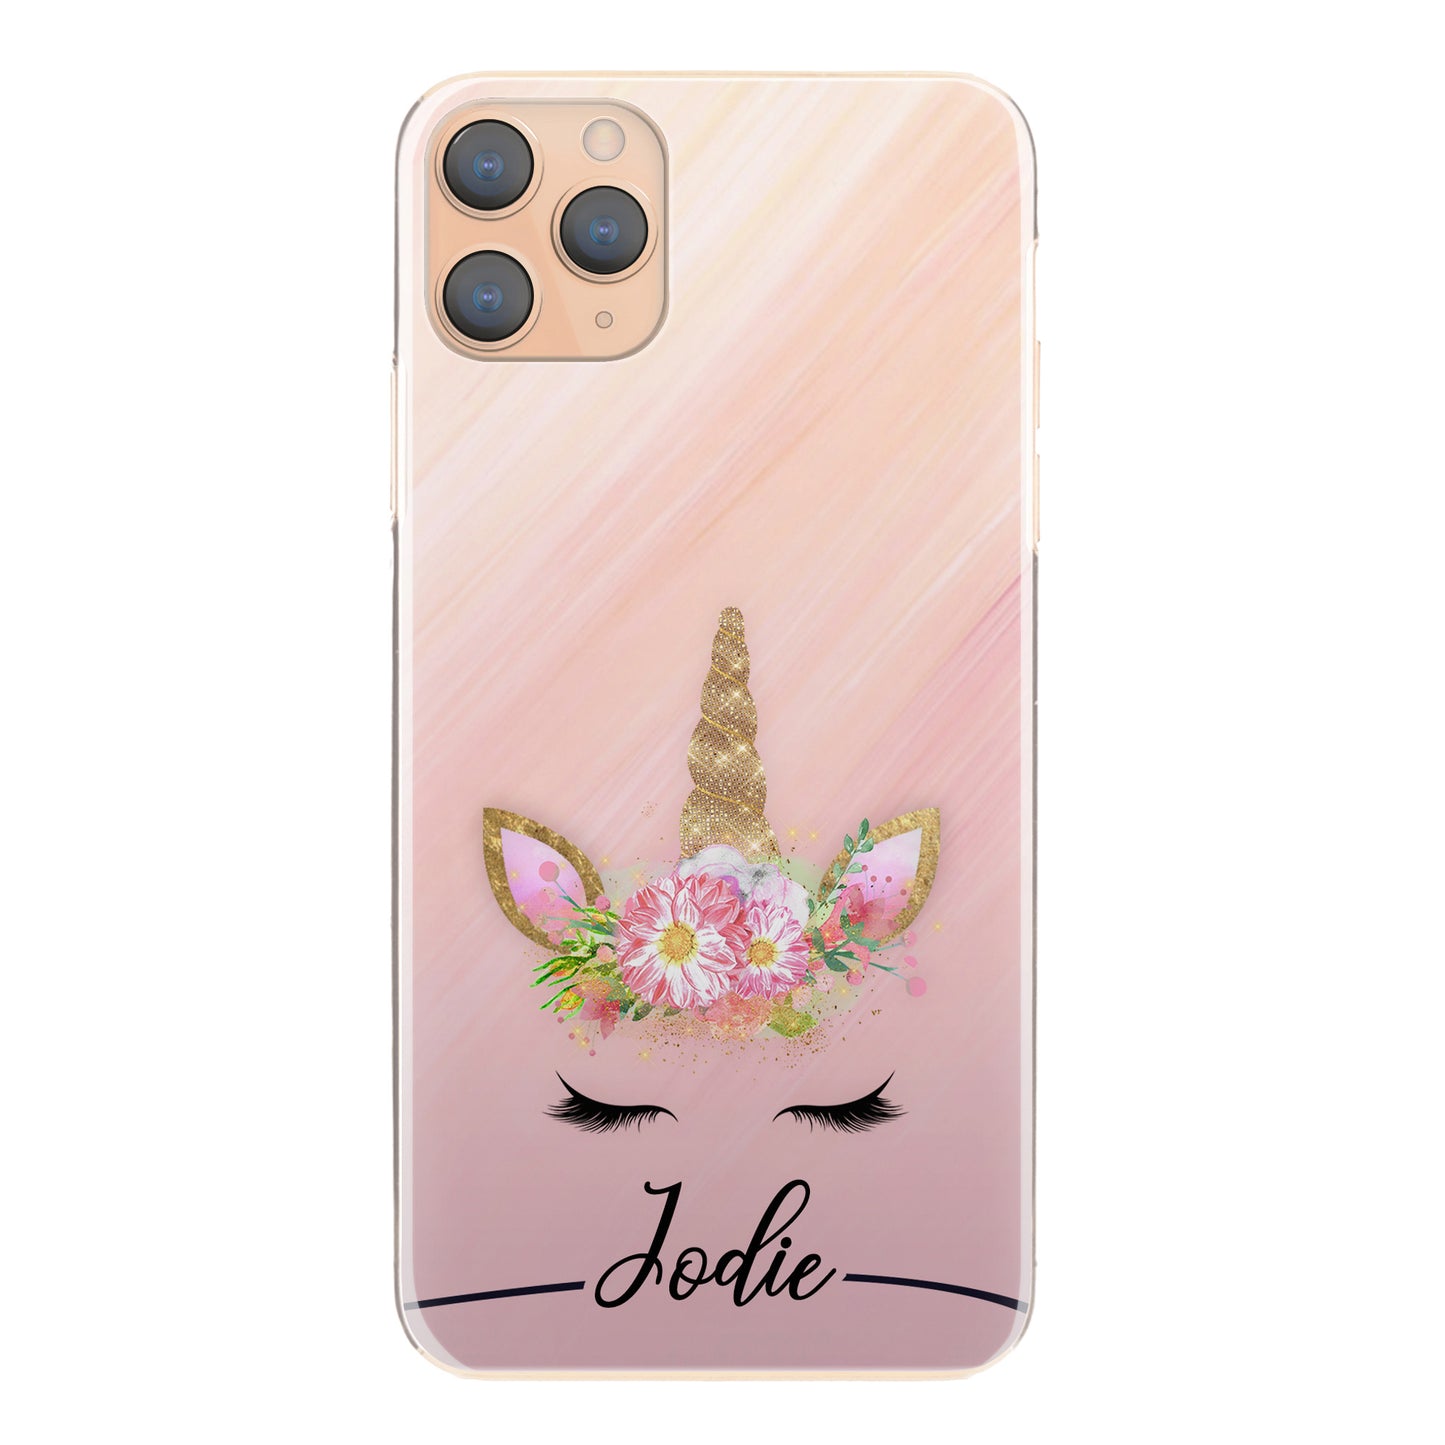 Personalised Xiaomi Phone Hard Case with Gold Floral Unicorn and Text on Pink